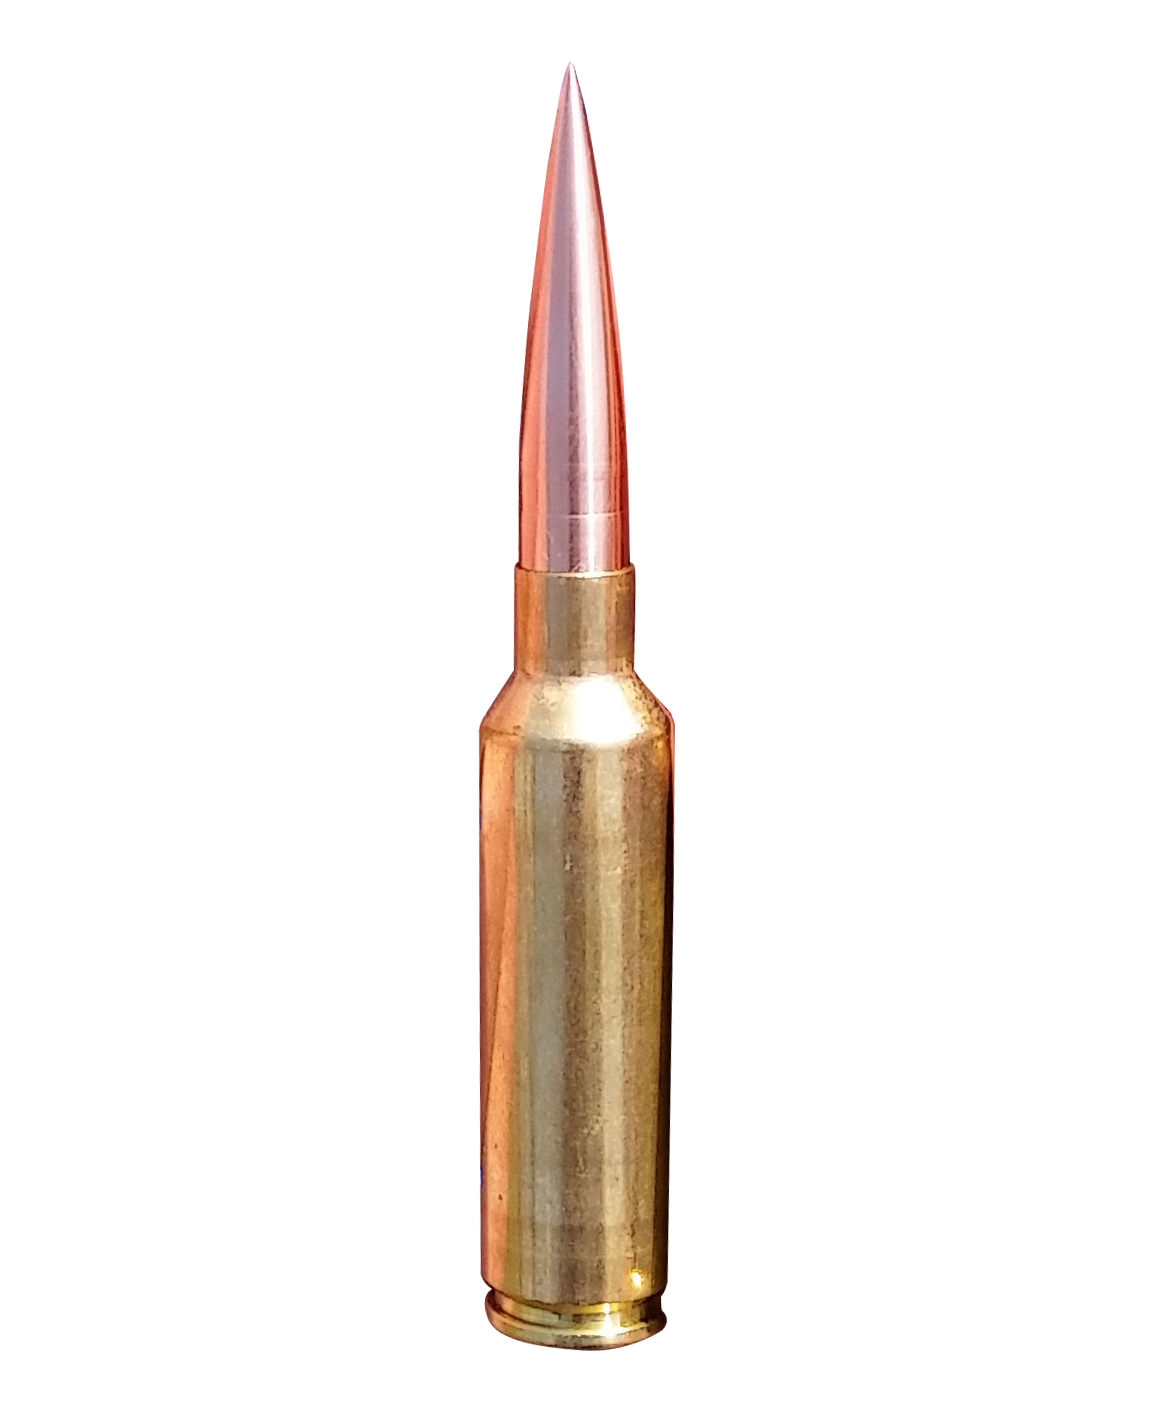 A Bullet On A Black Background